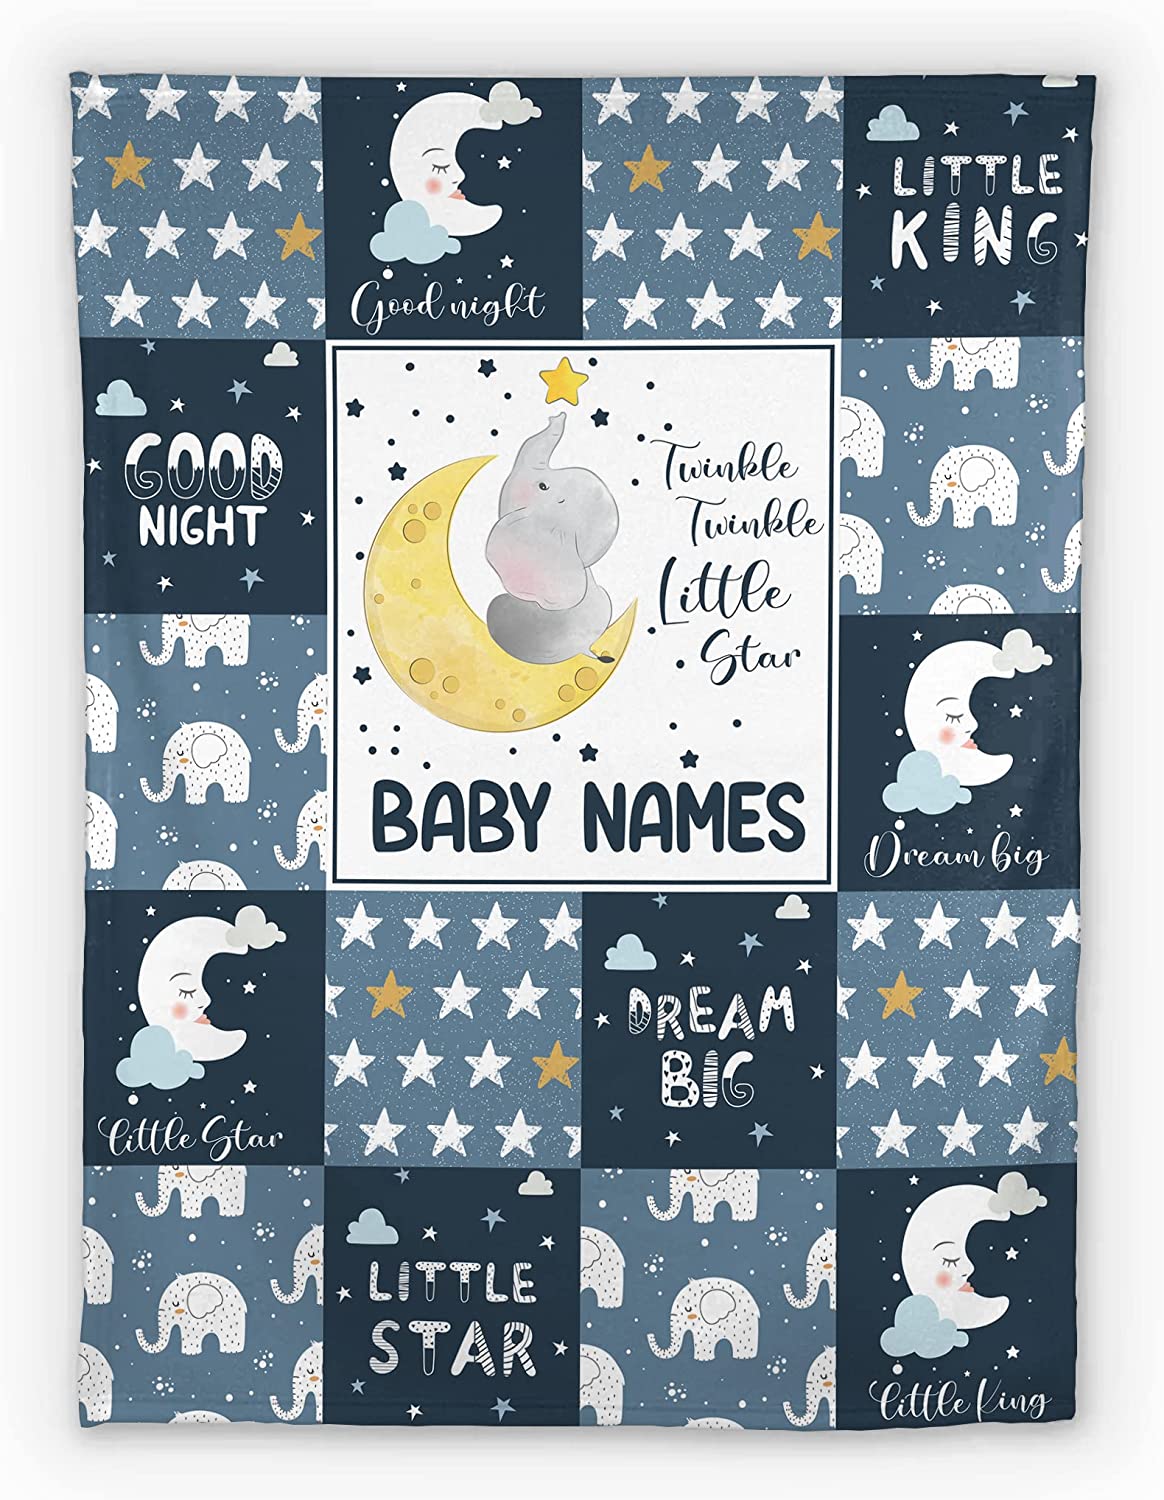 Personalized Baby Boy Blankets, Customize Blanket with Names - Soft Flush Fleece for Newborn Blue Little Star Elephant